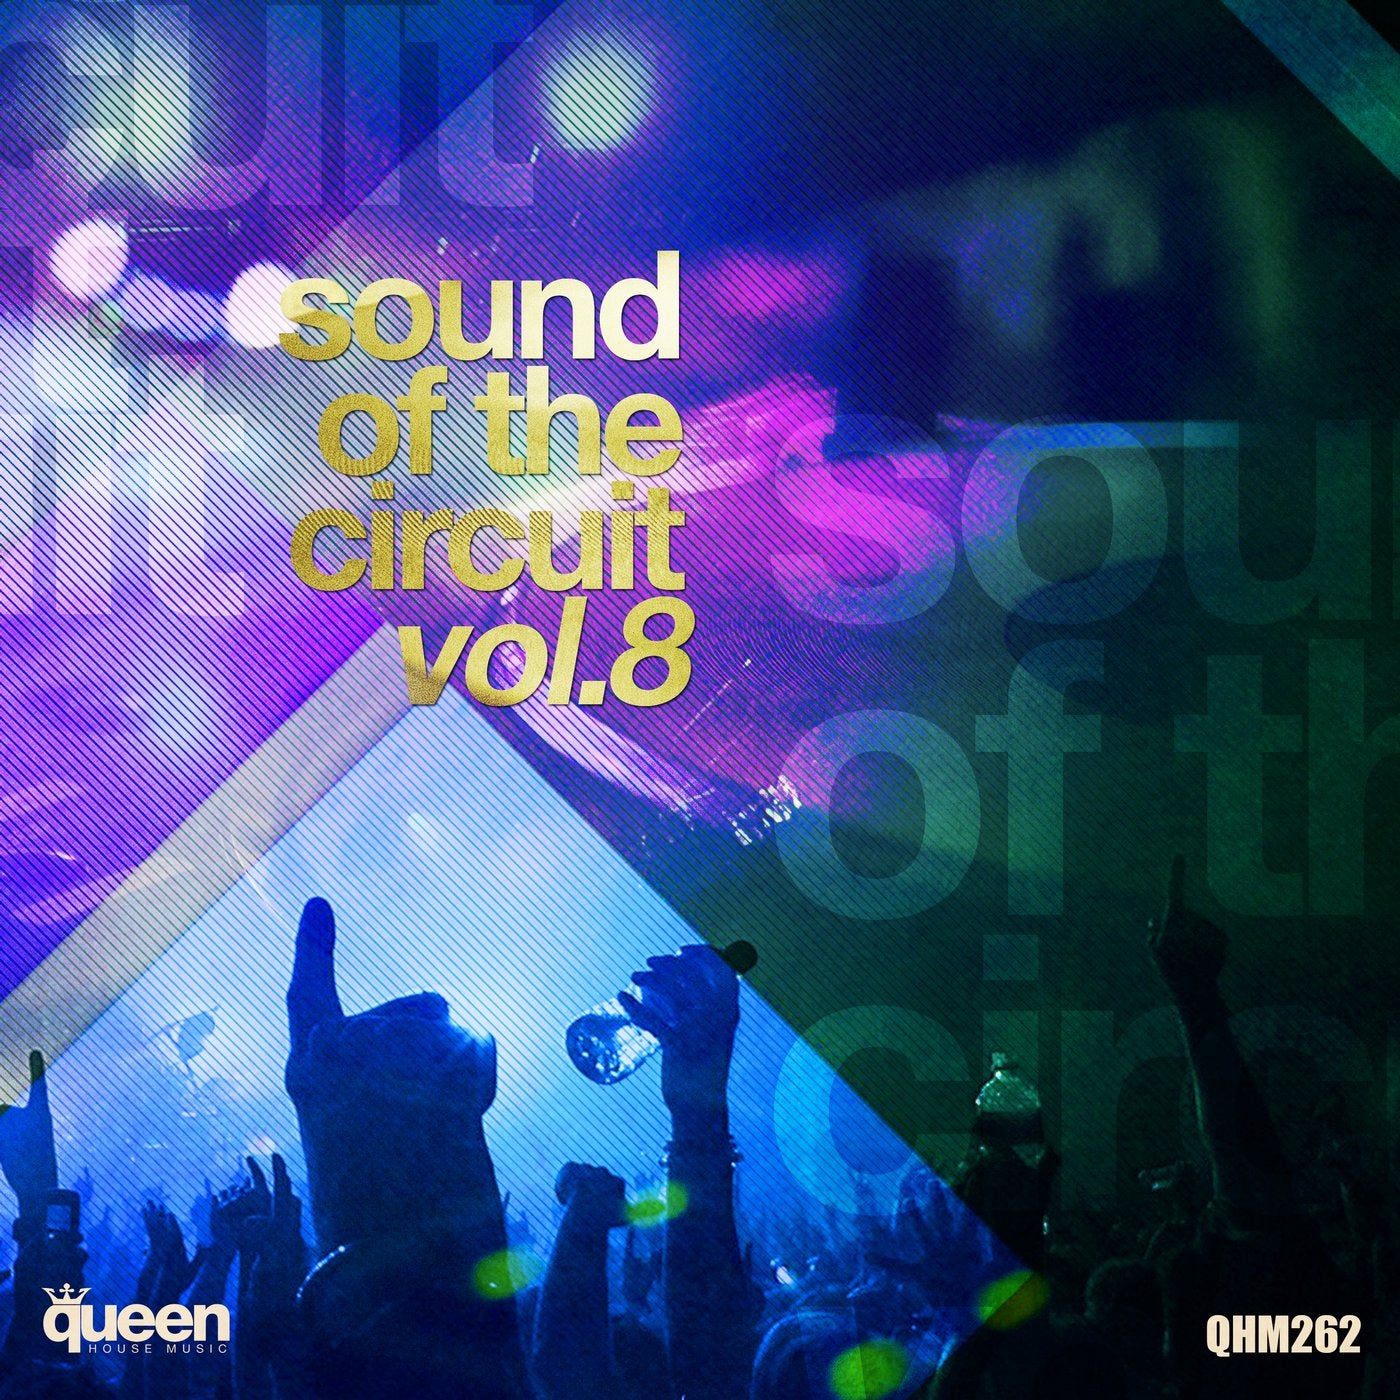 Sound of the Circuit, Vol. 8